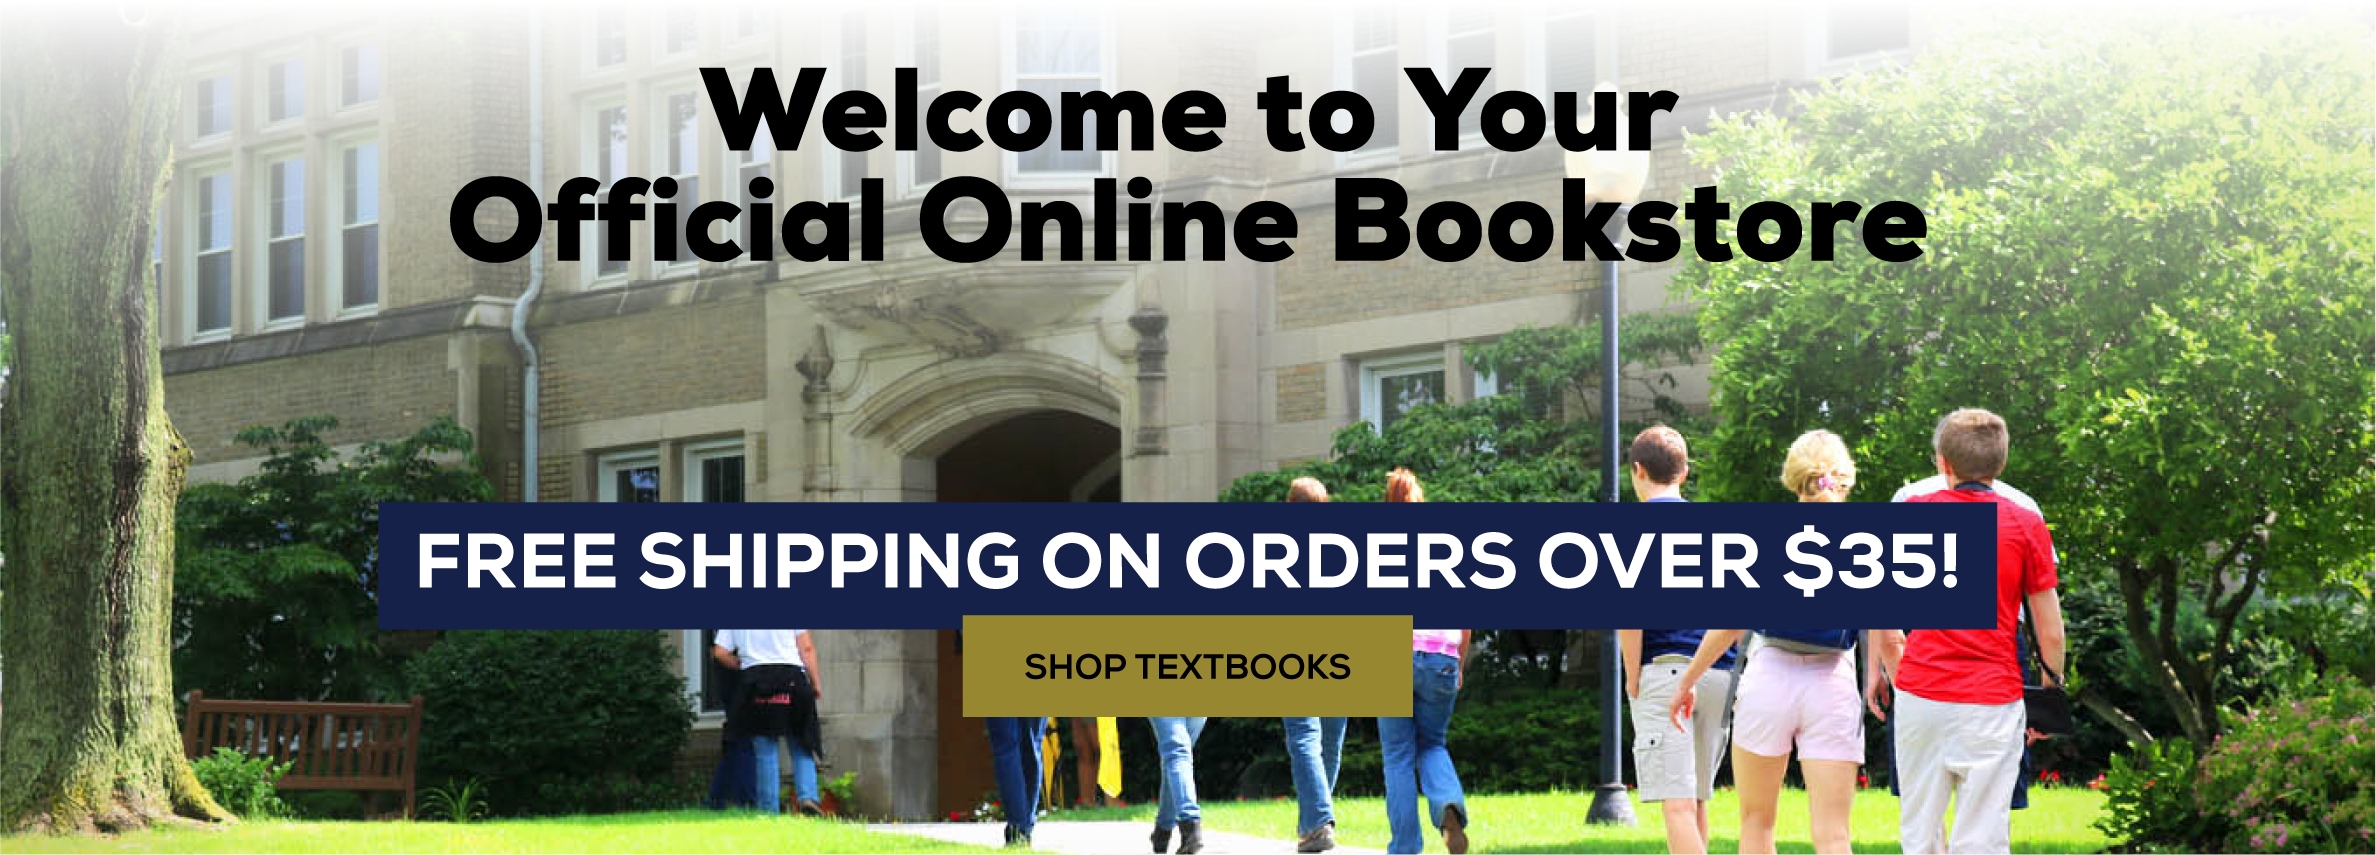 Welcome to your official online bookstore. Free shipping on all orders over $35! Shop Textbooks